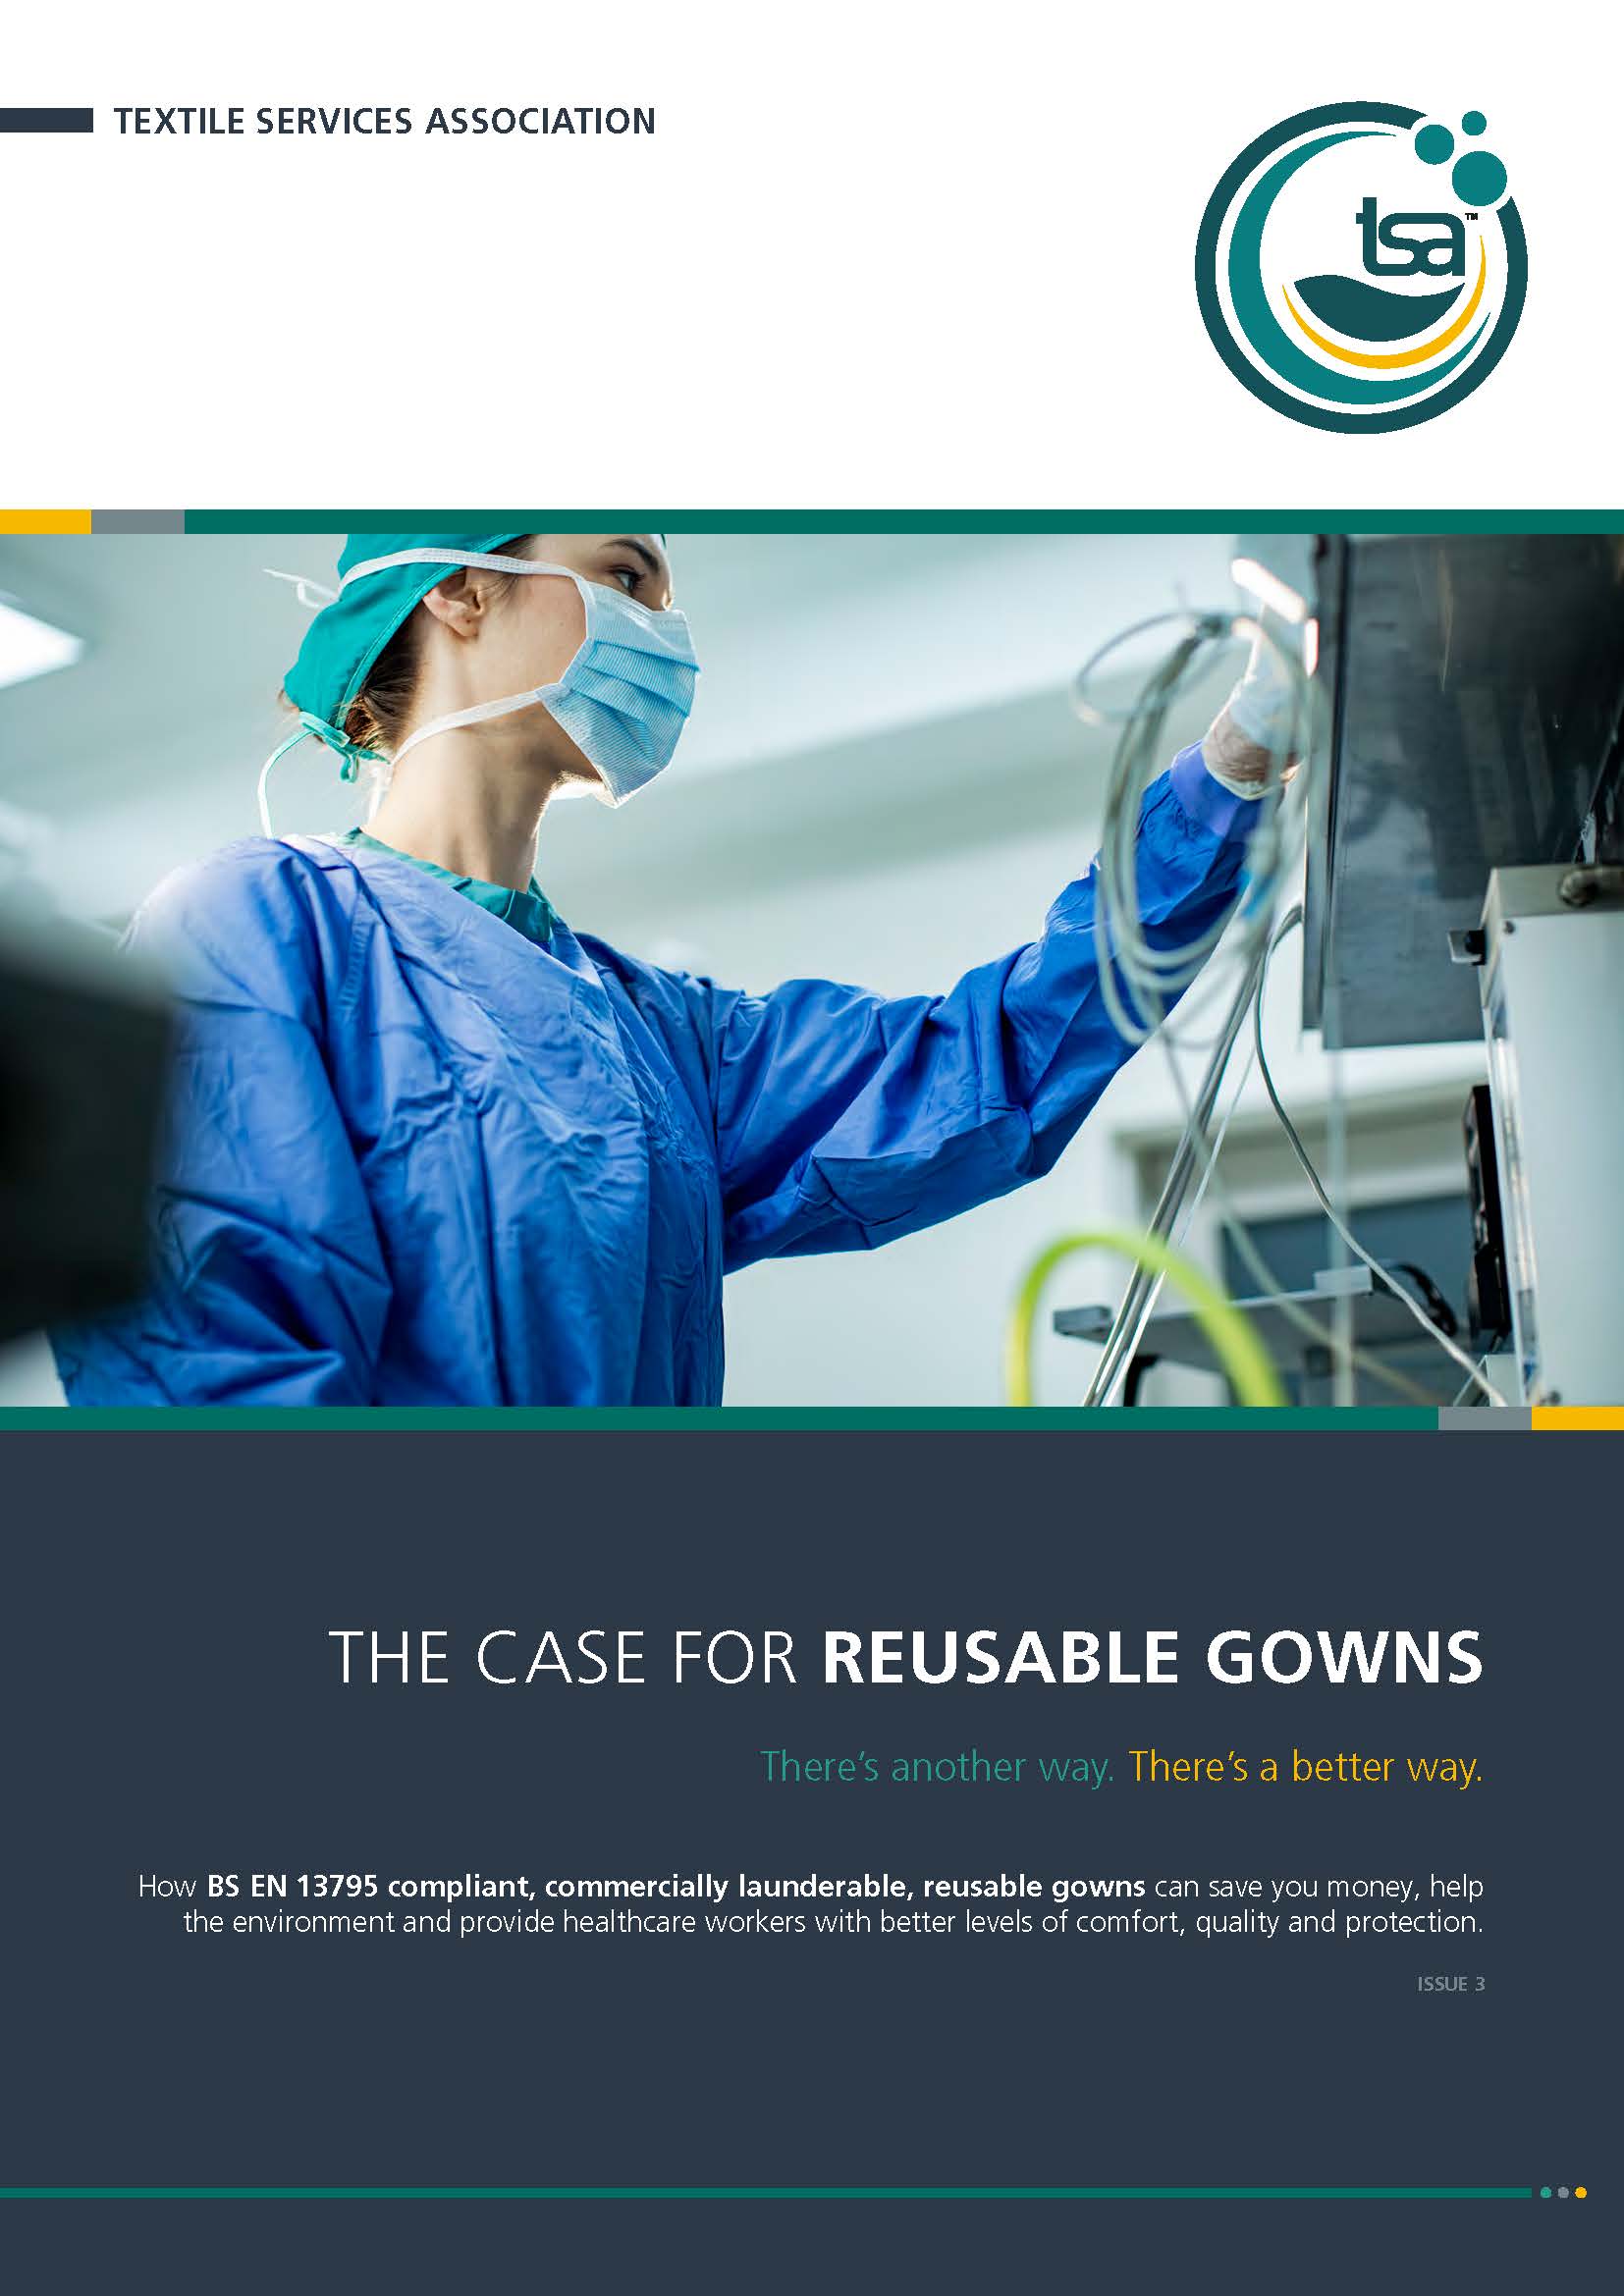 The Case for Reusable Isolation Gowns